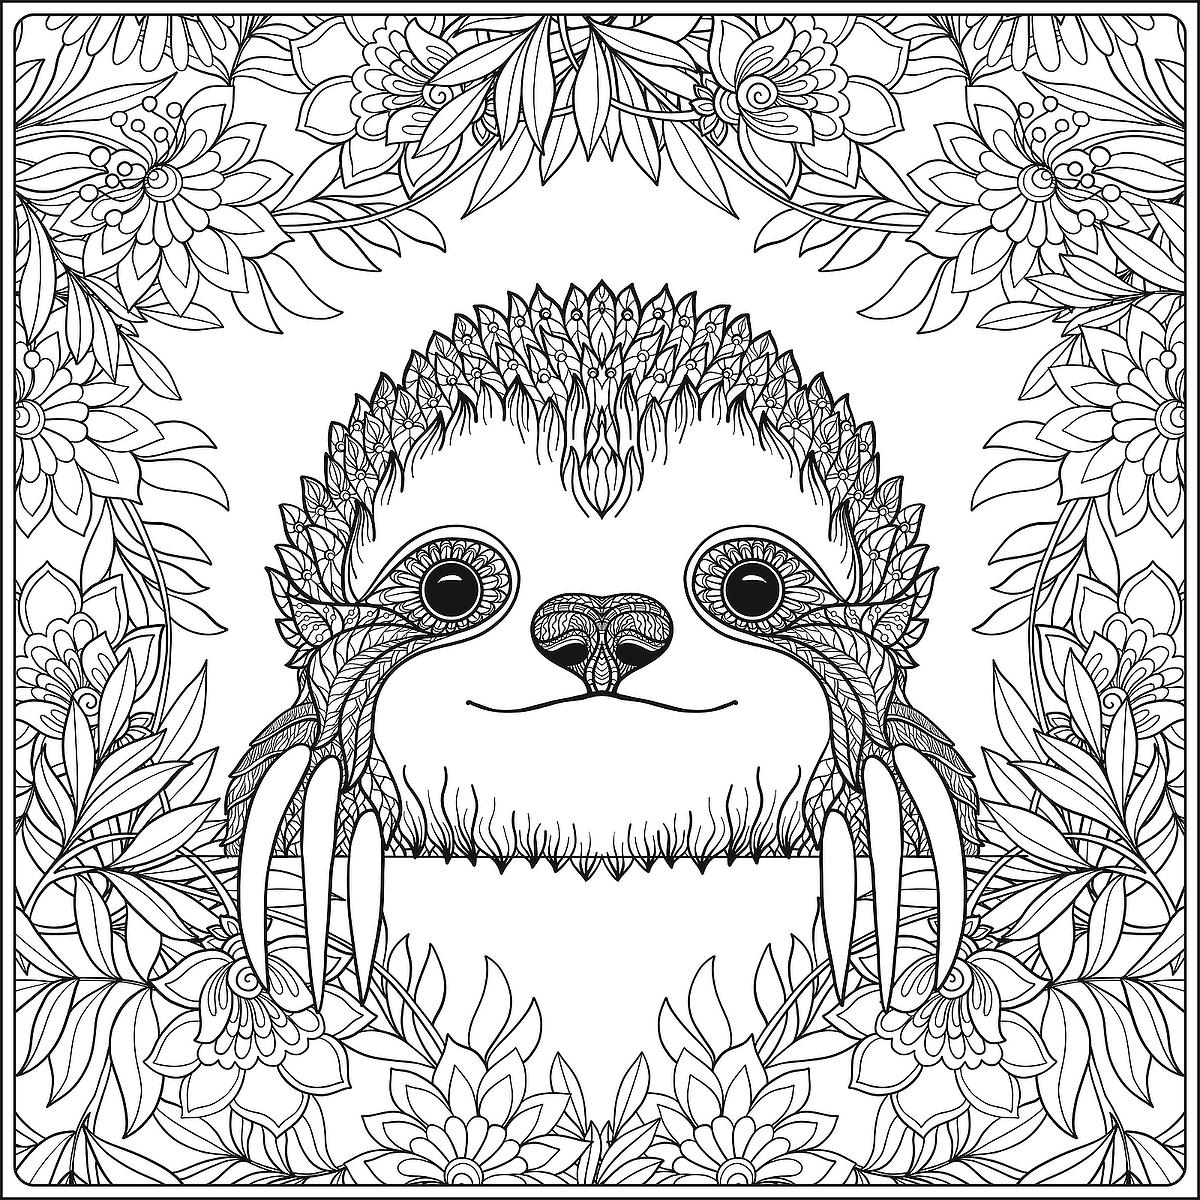 Sloth coloring pages free printable coloring pages of sloths to help you slow down relax like a sloth printables mom